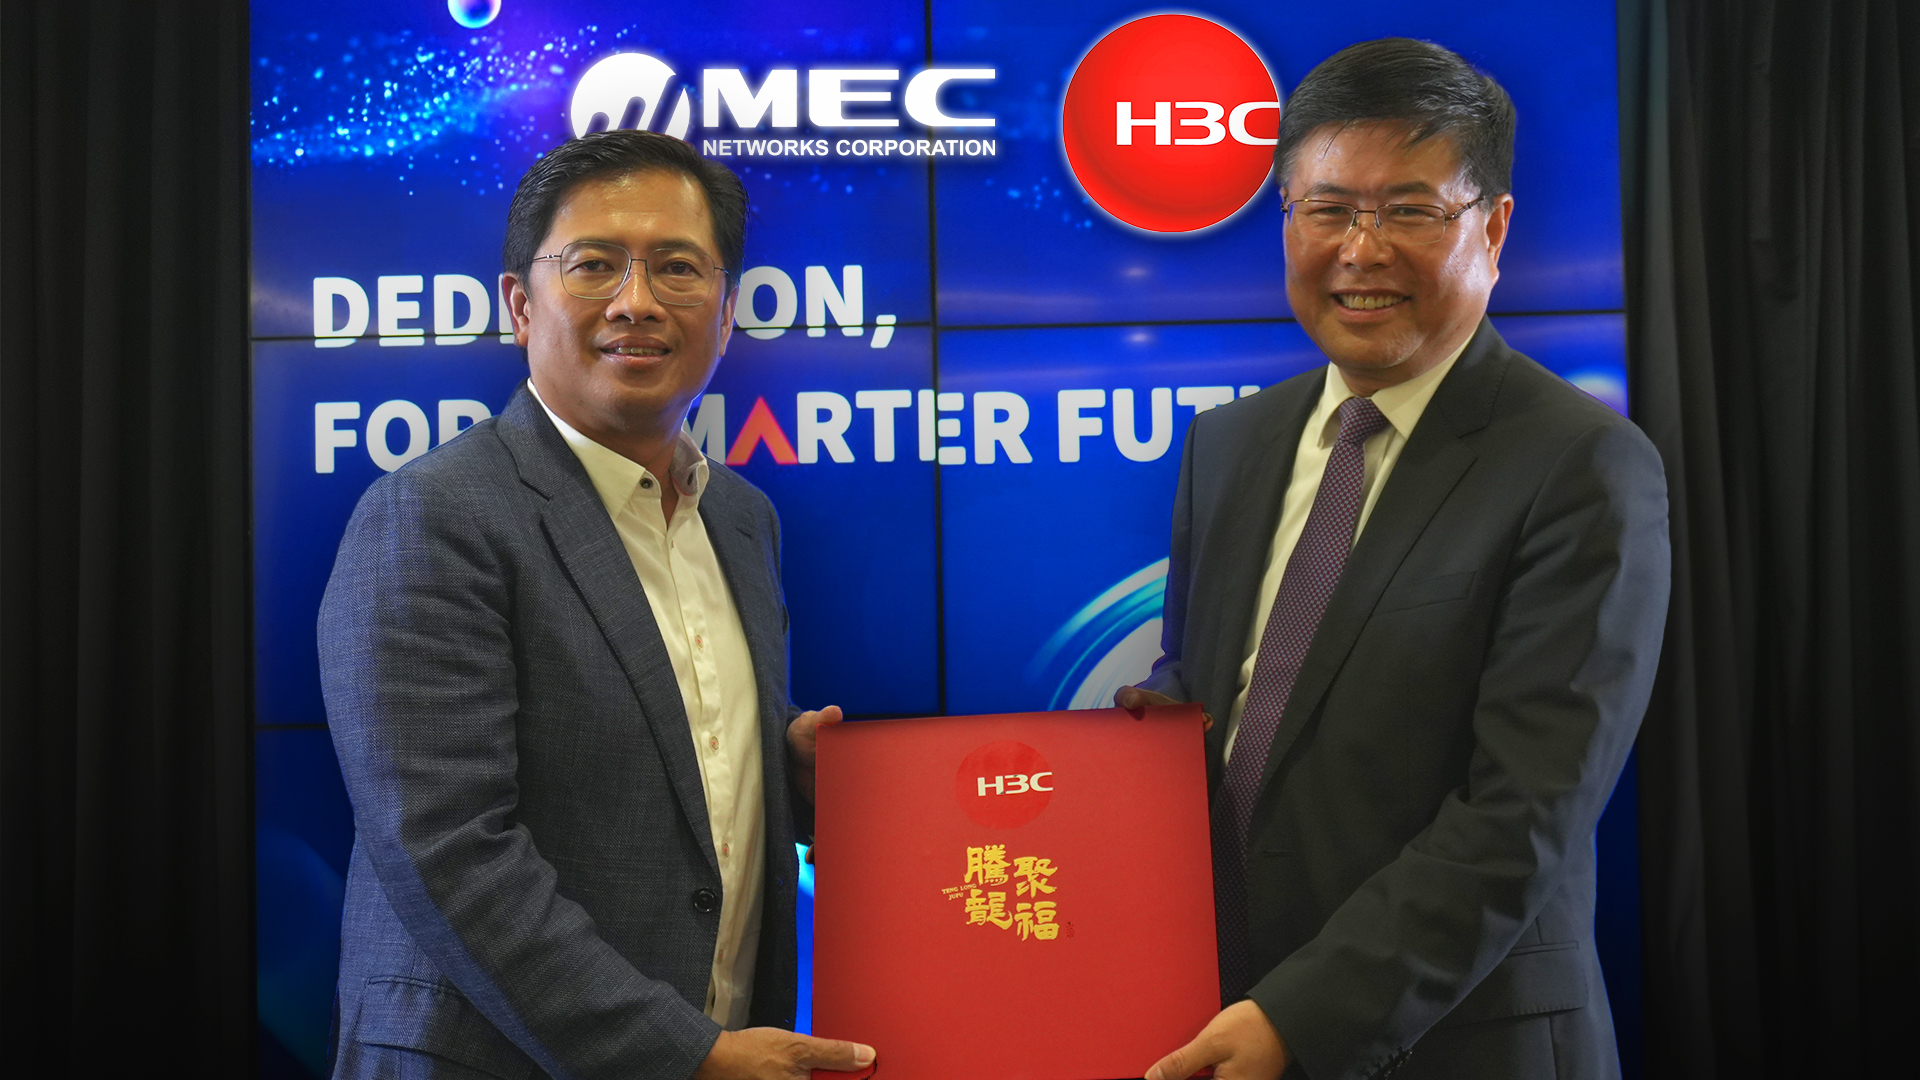 MEC Networks and H3C seal the beginning of their partnership.